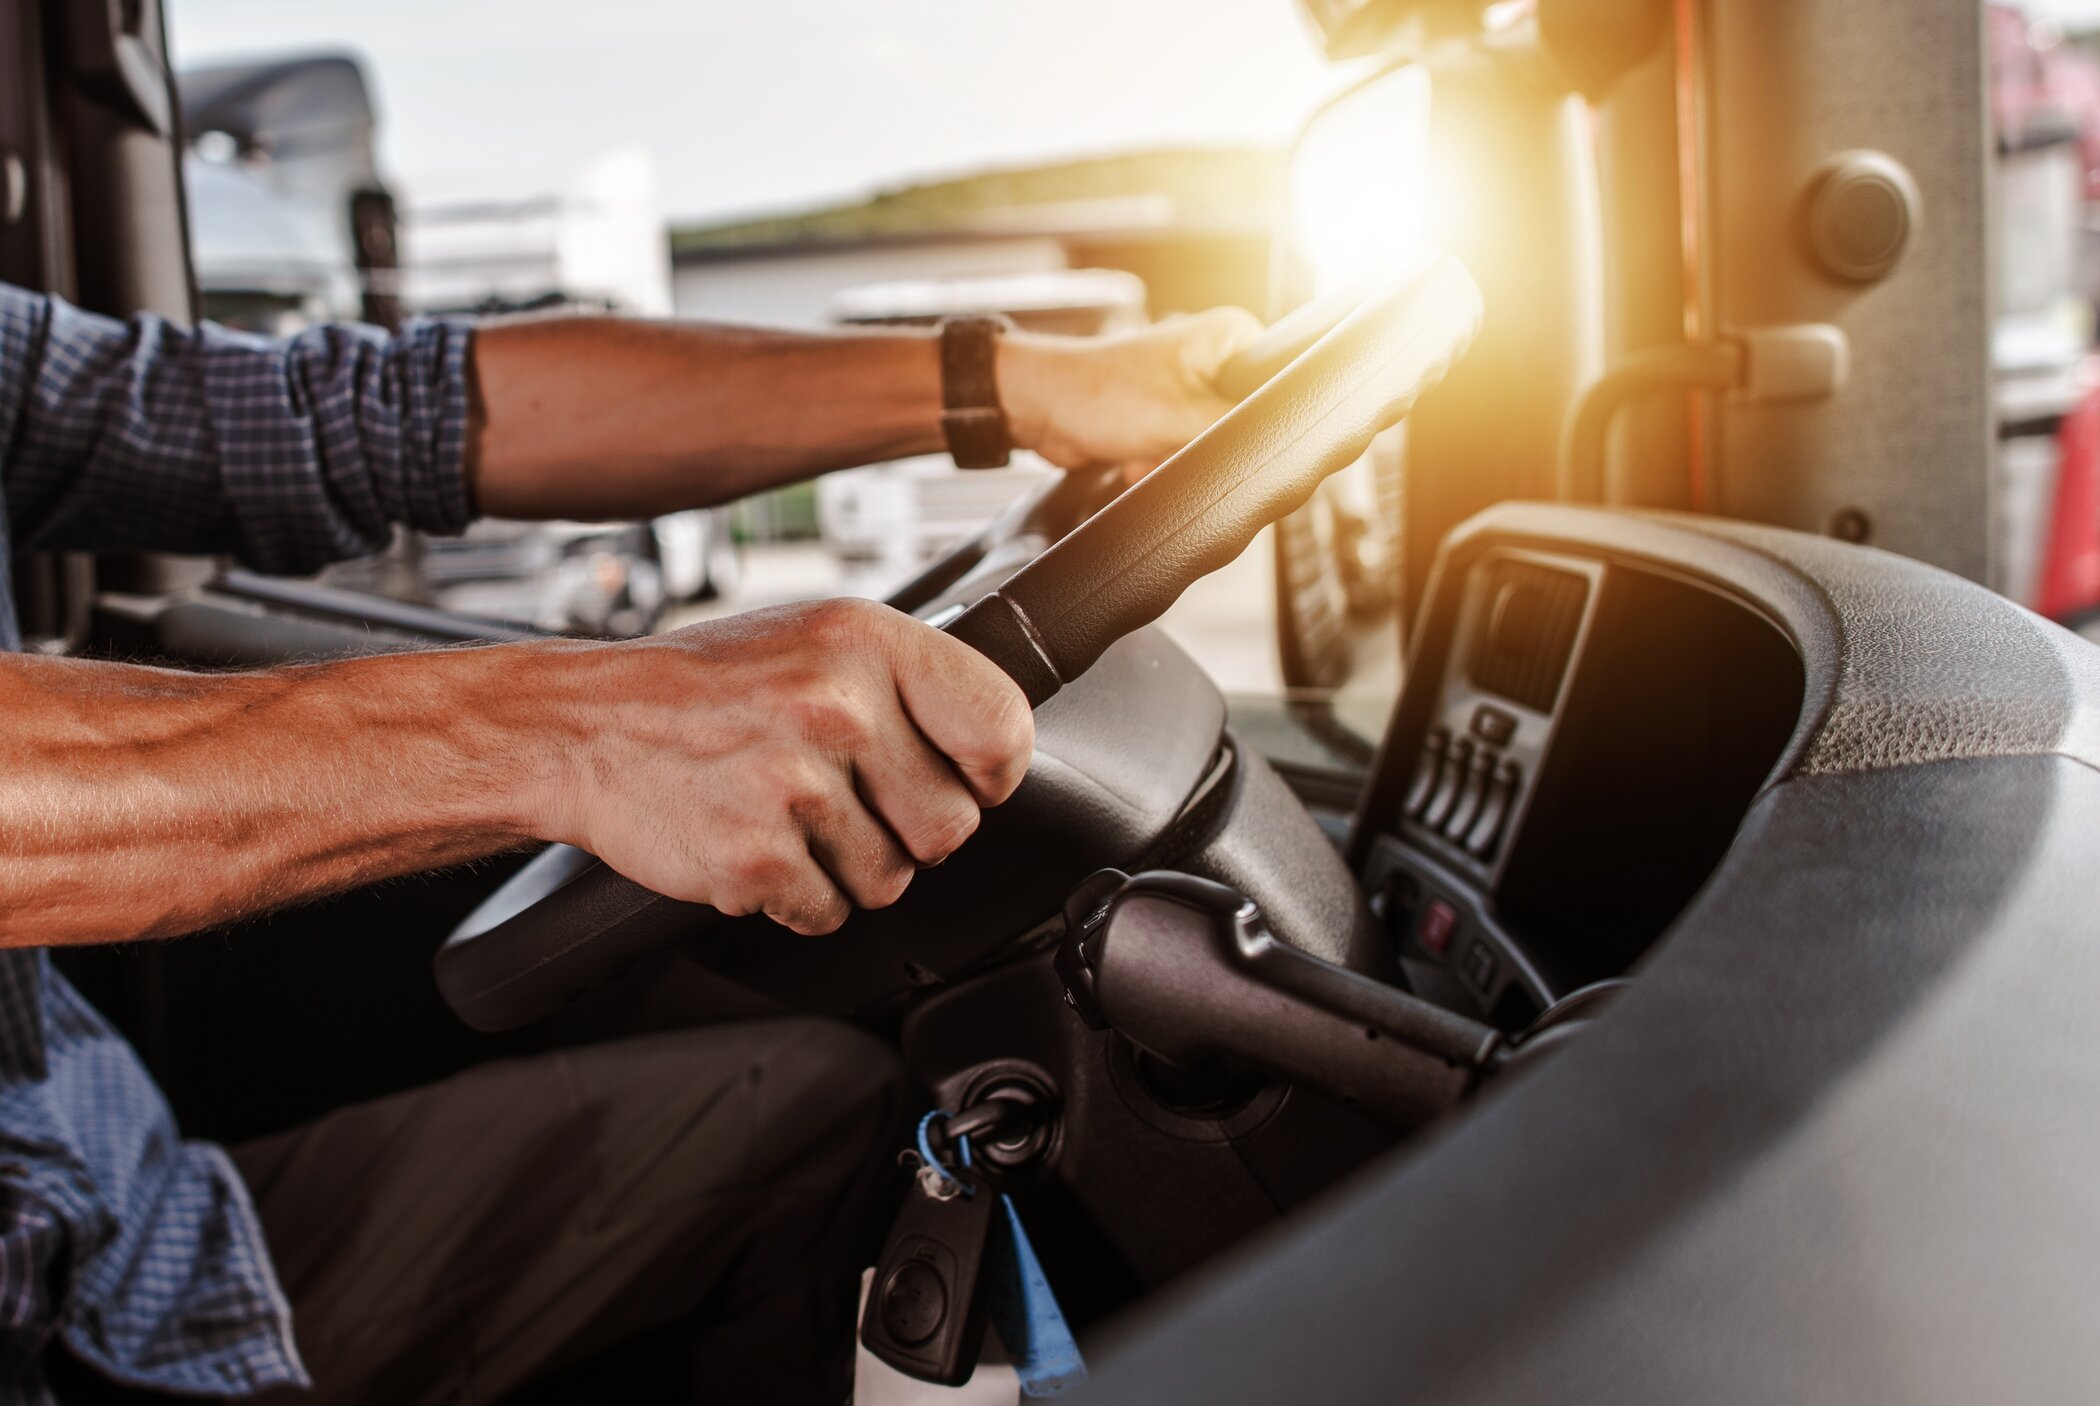 Different levels of HGV driver explained